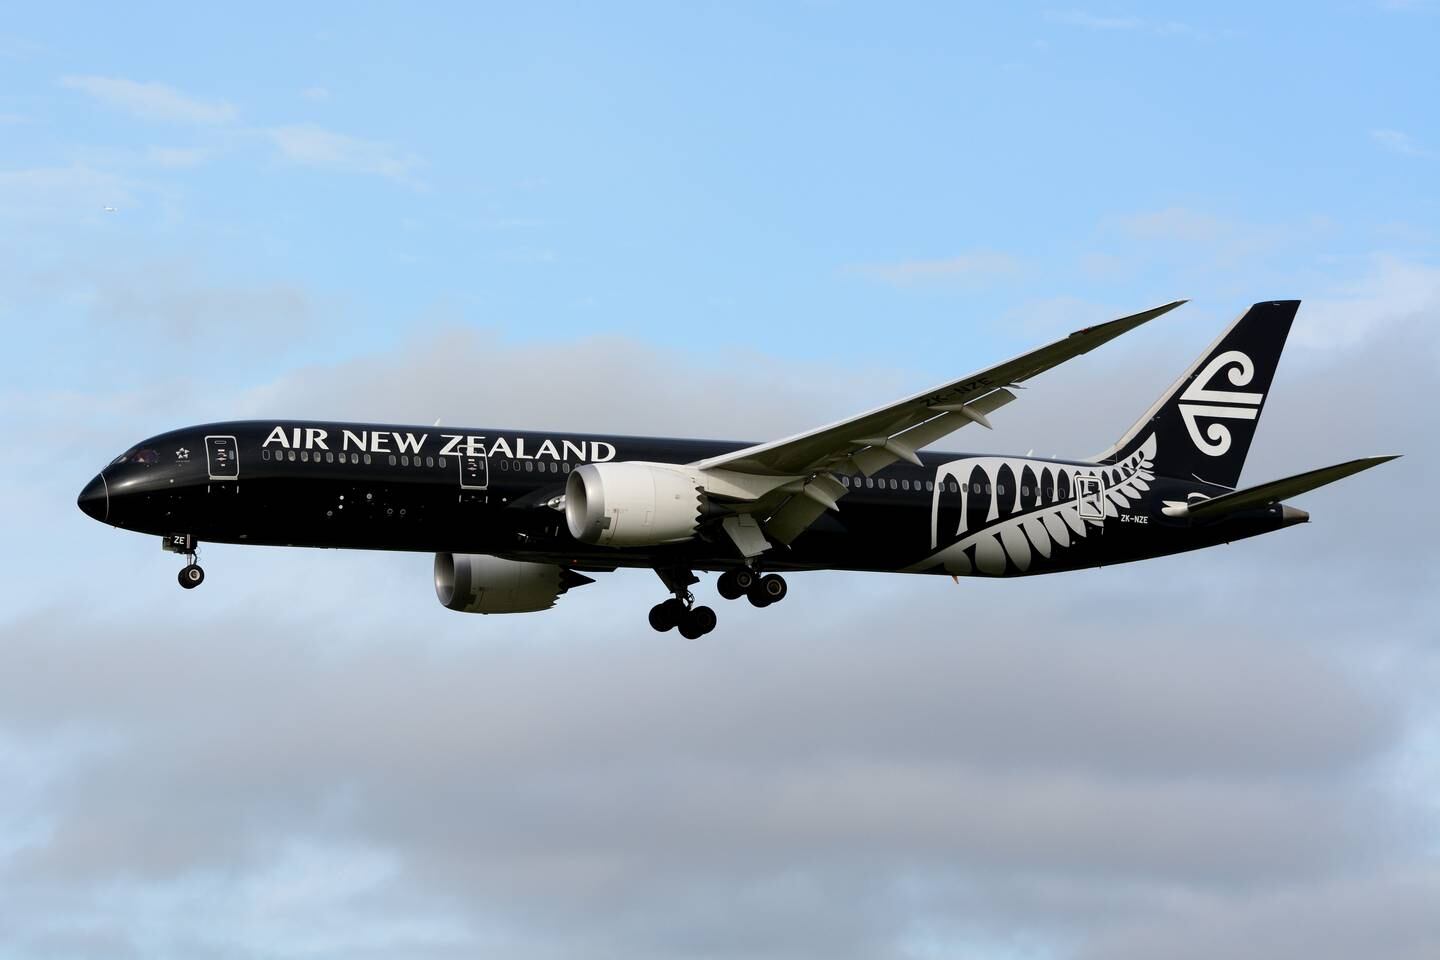 The infected woman tested negative for Covid-19 before boarding an Air New Zealand flight from Auckland to the Cook Islands. Photo: flickr 